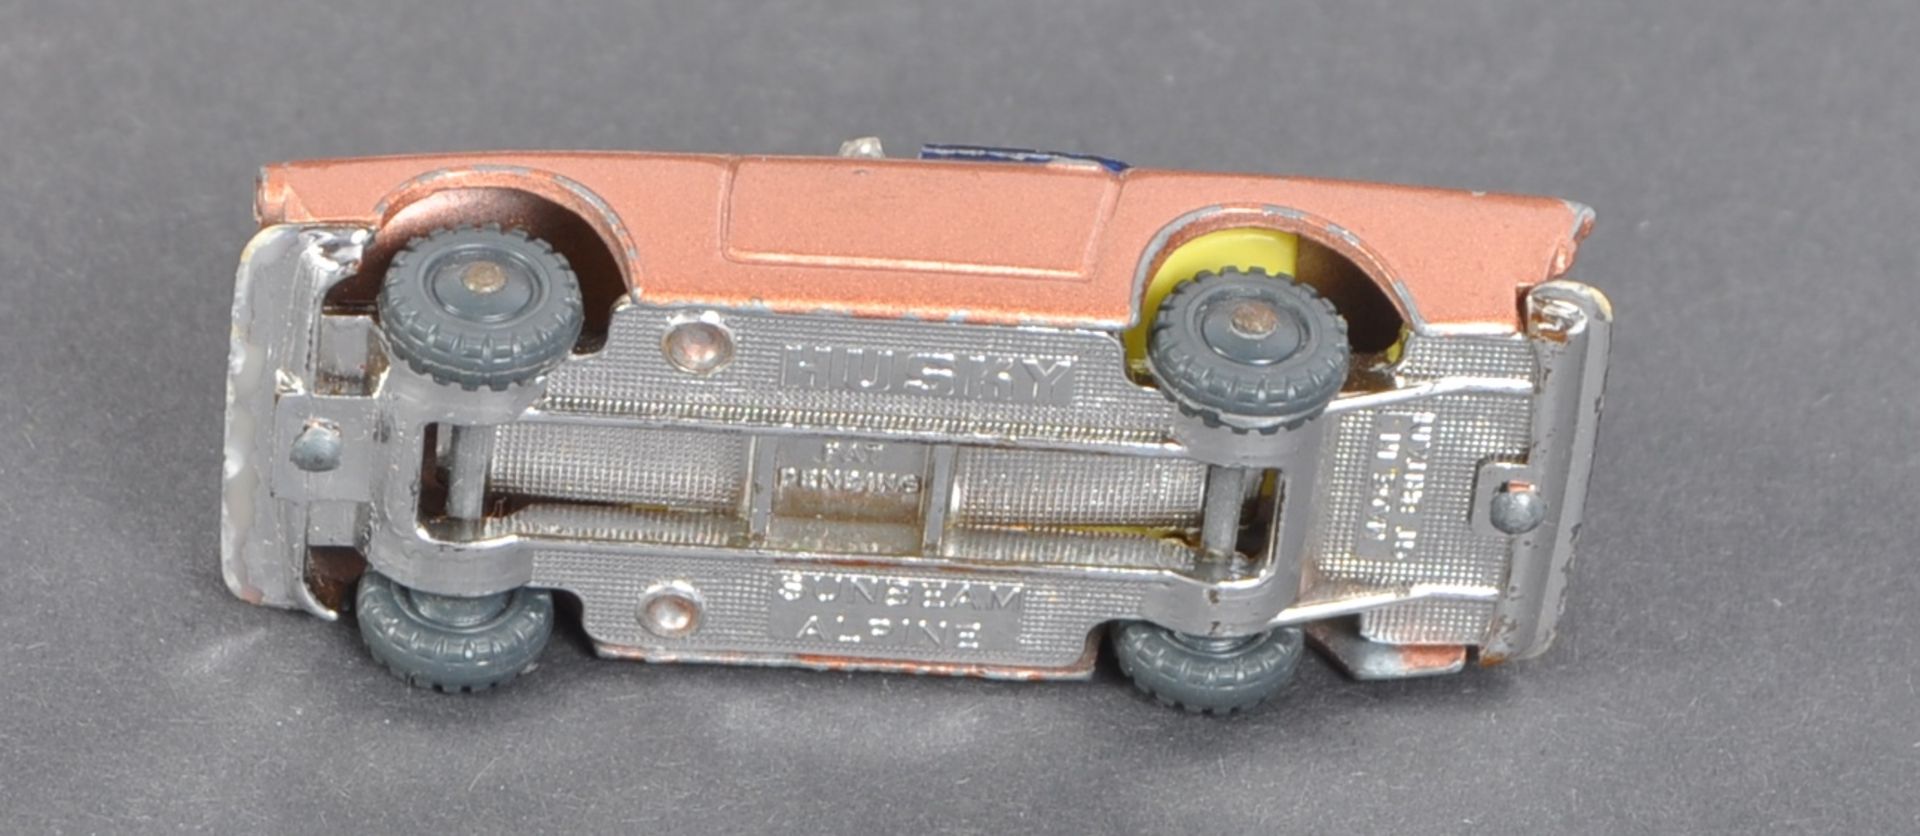 COLLECTION OF ASSORTED VINTAGE HUSKY DIECAST MODELS - Image 8 of 8